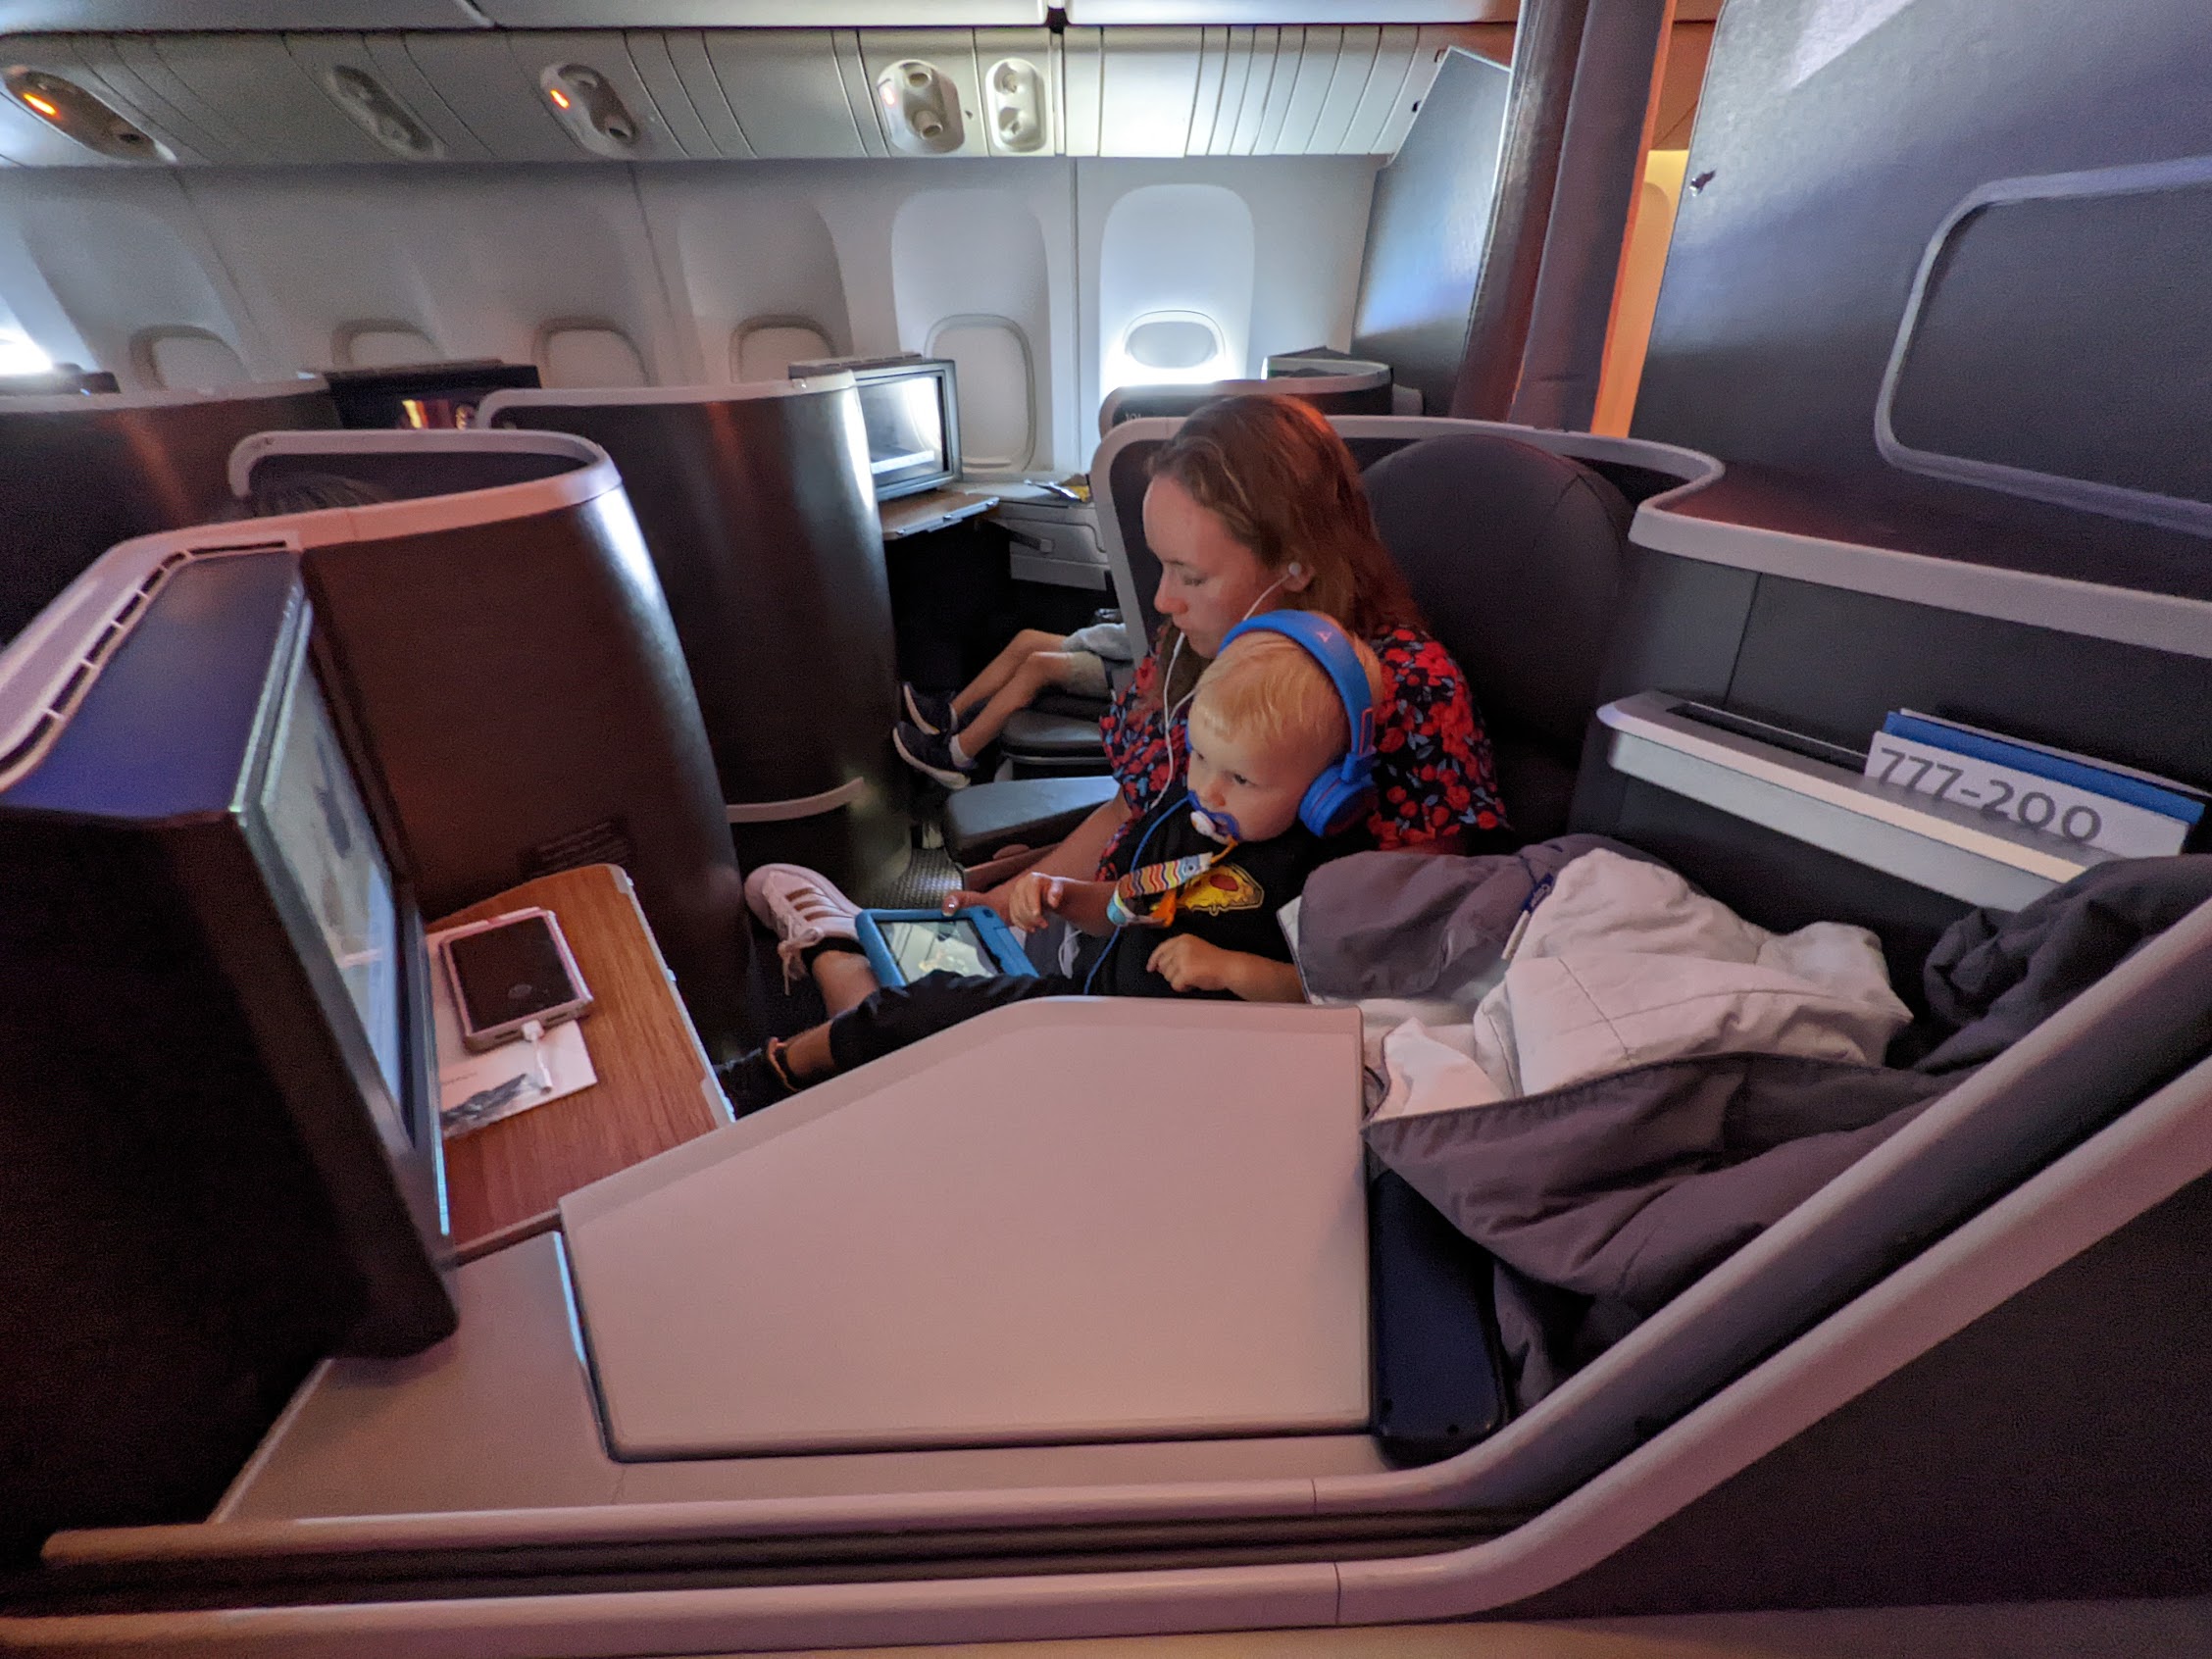 a woman and a child sitting in an airplane